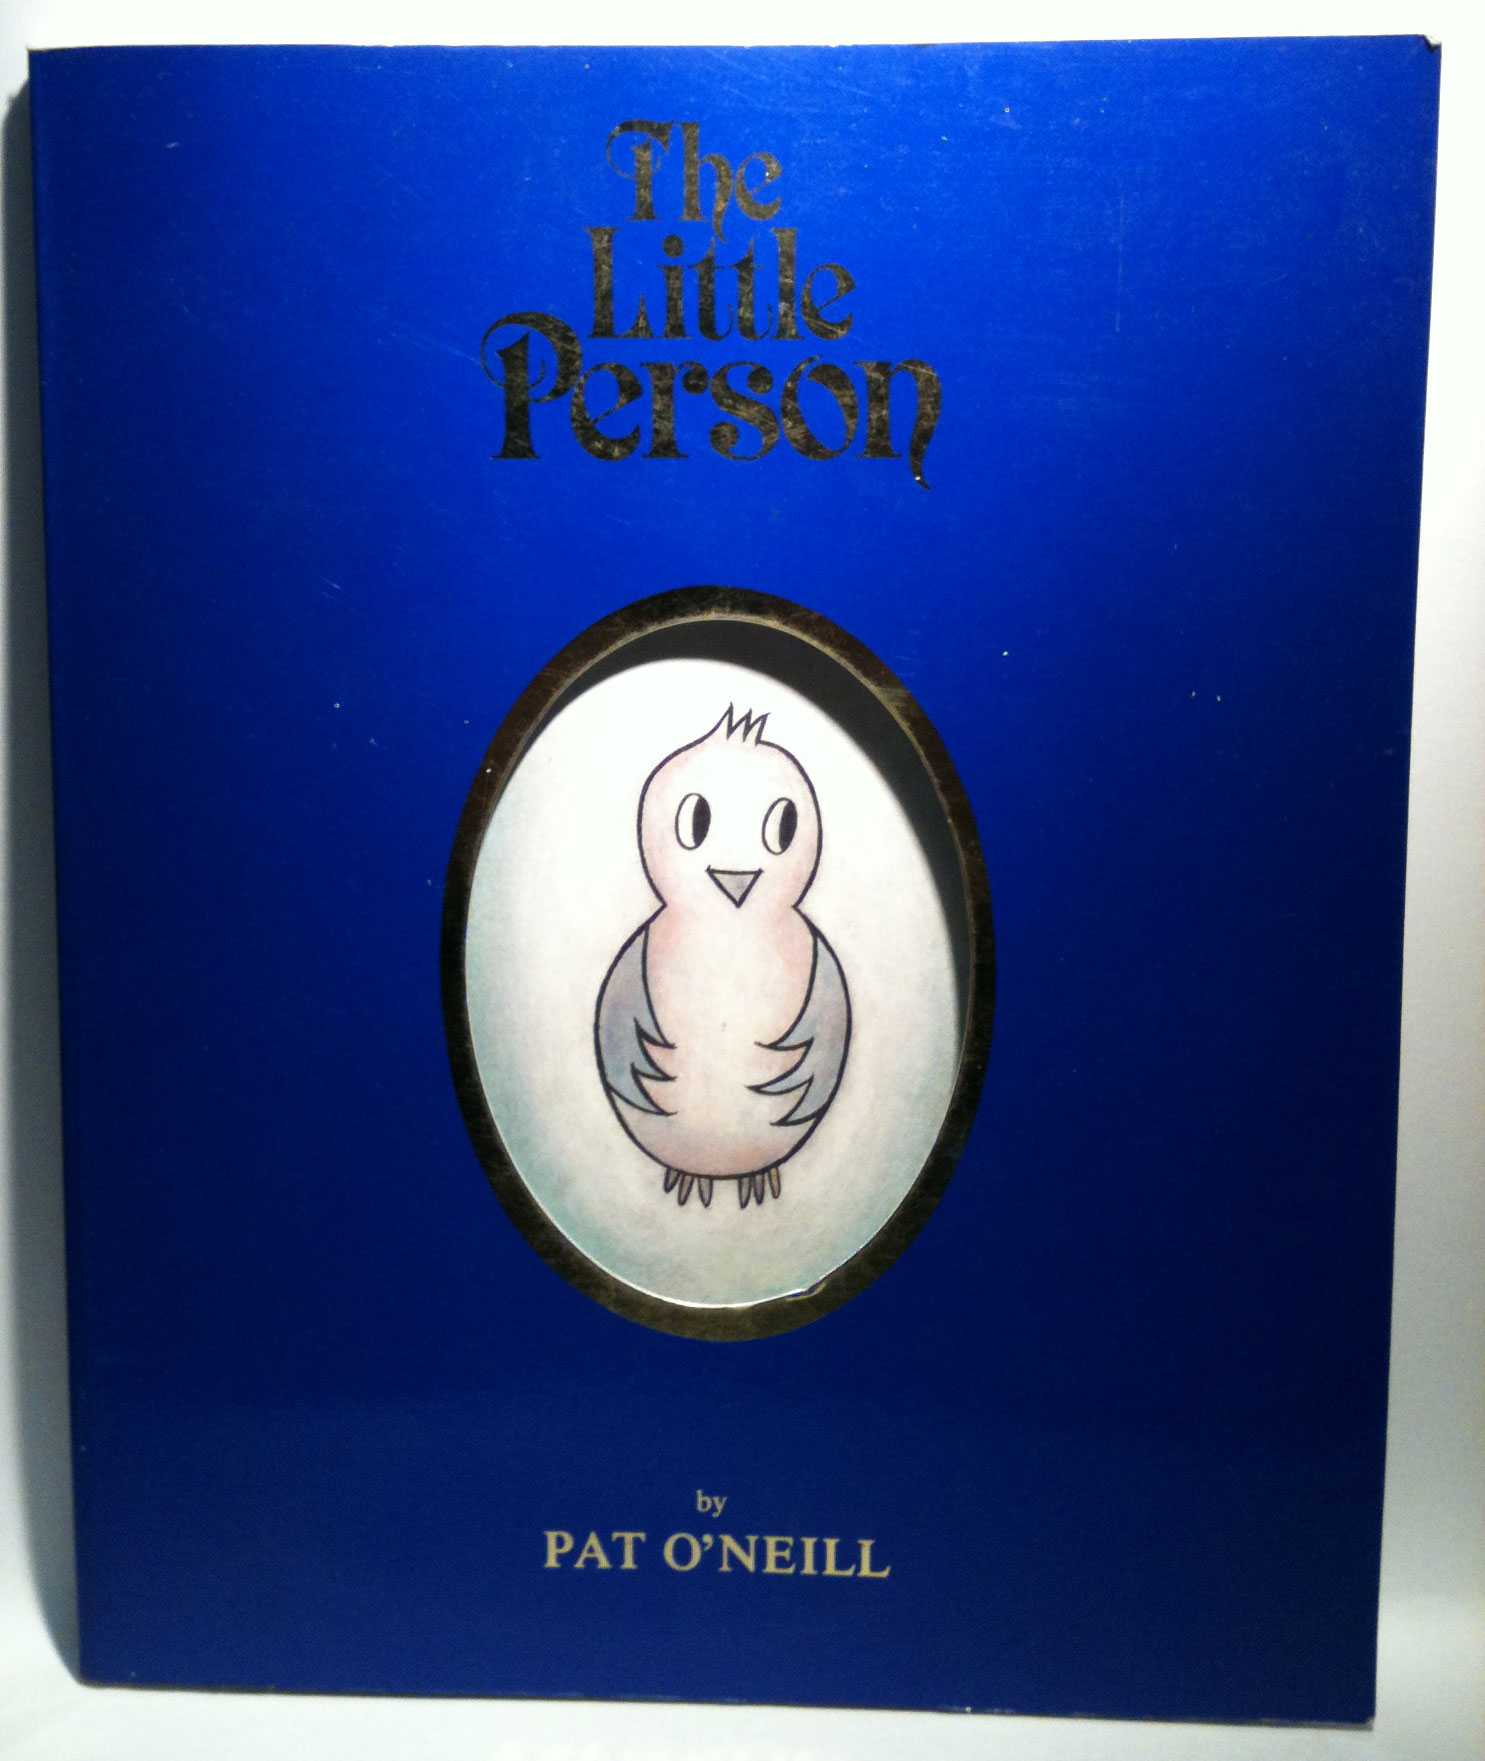 Pat O'Neill - The Little Person